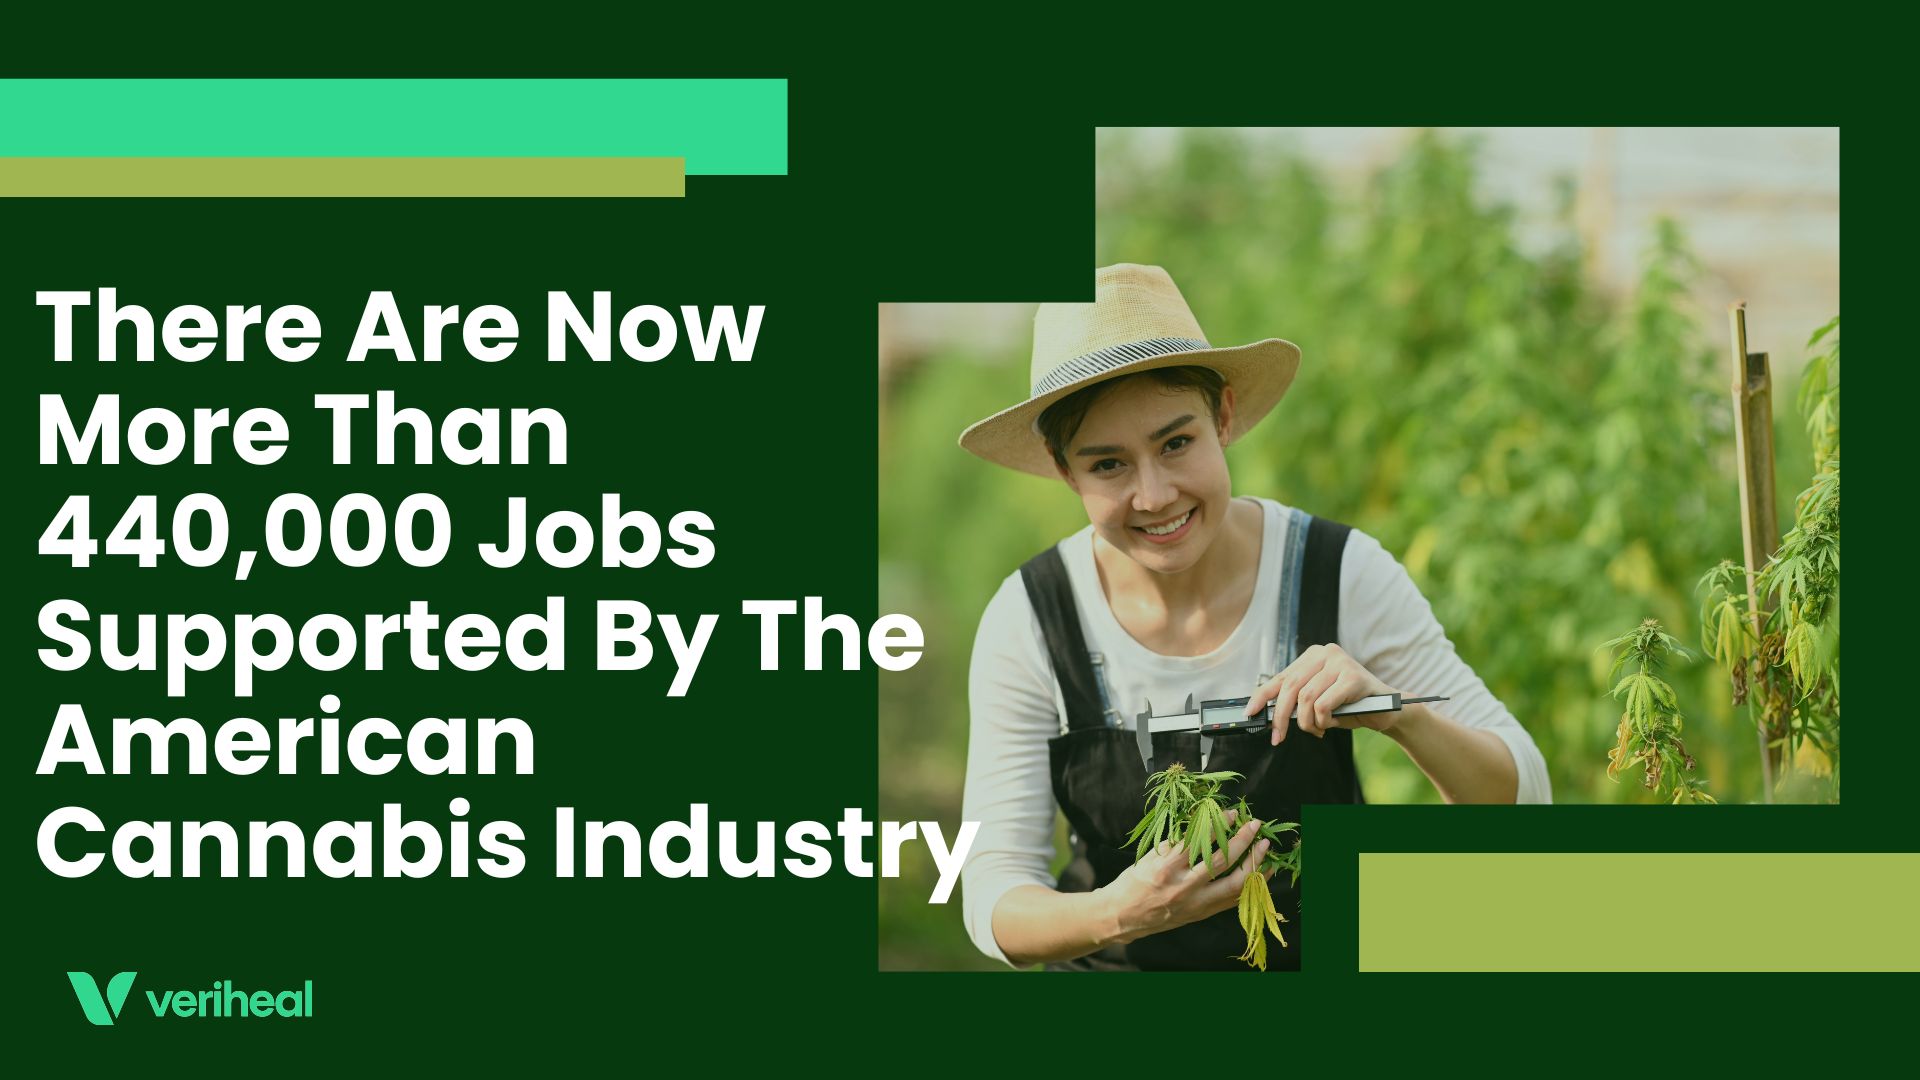 There Are Now More Than 440,000 Jobs Supported By The American Cannabis Industry